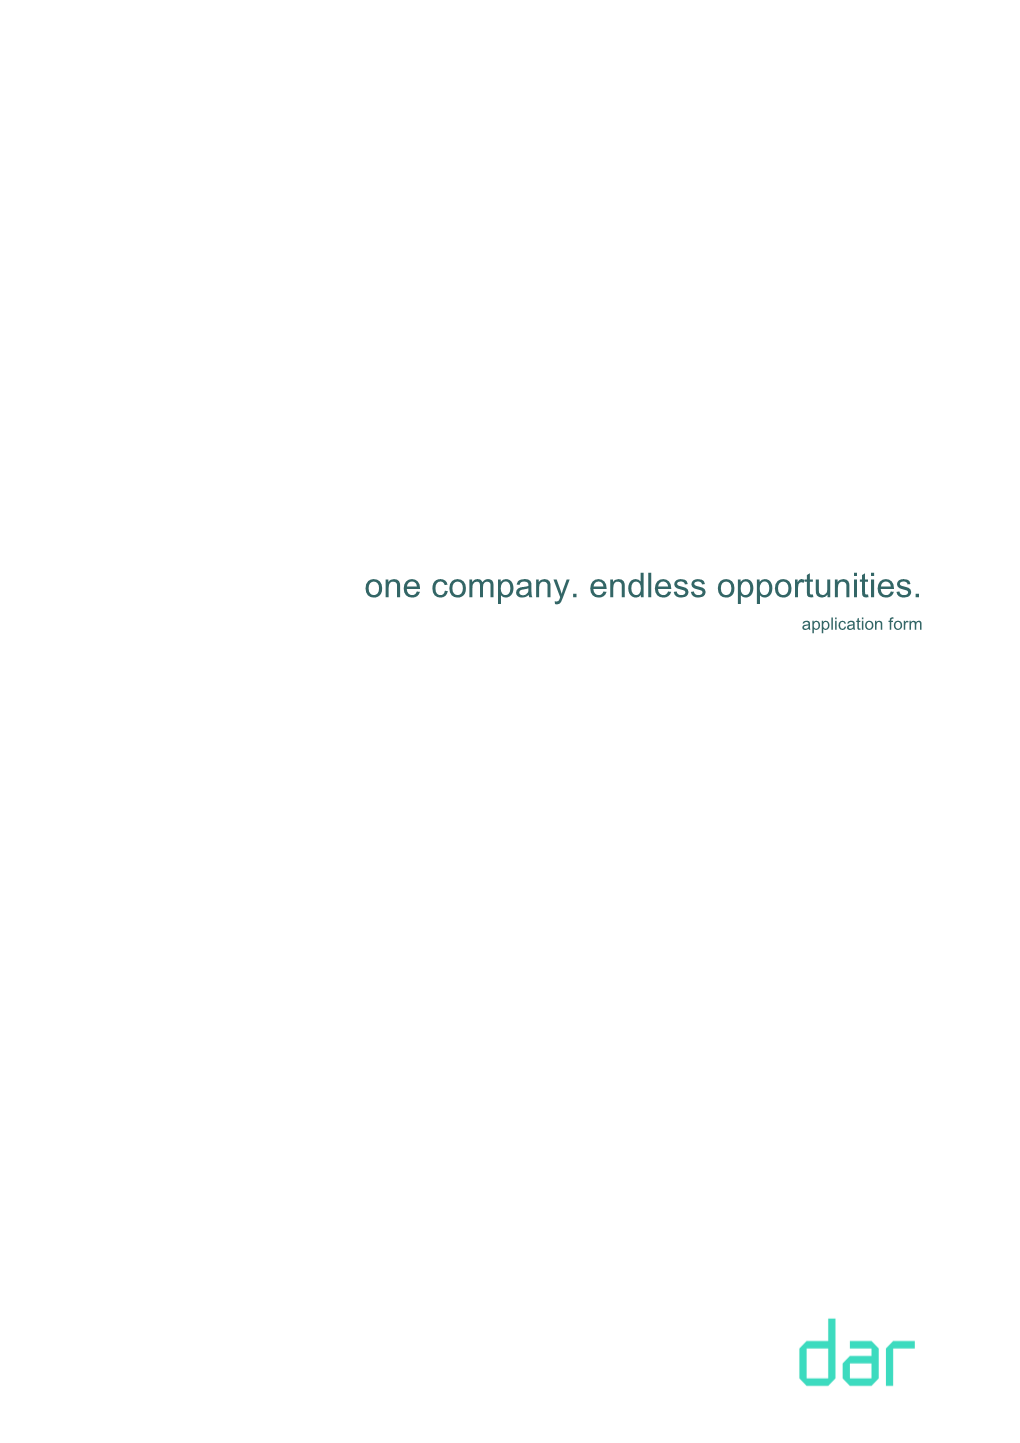 One Company. Endless Opportunities